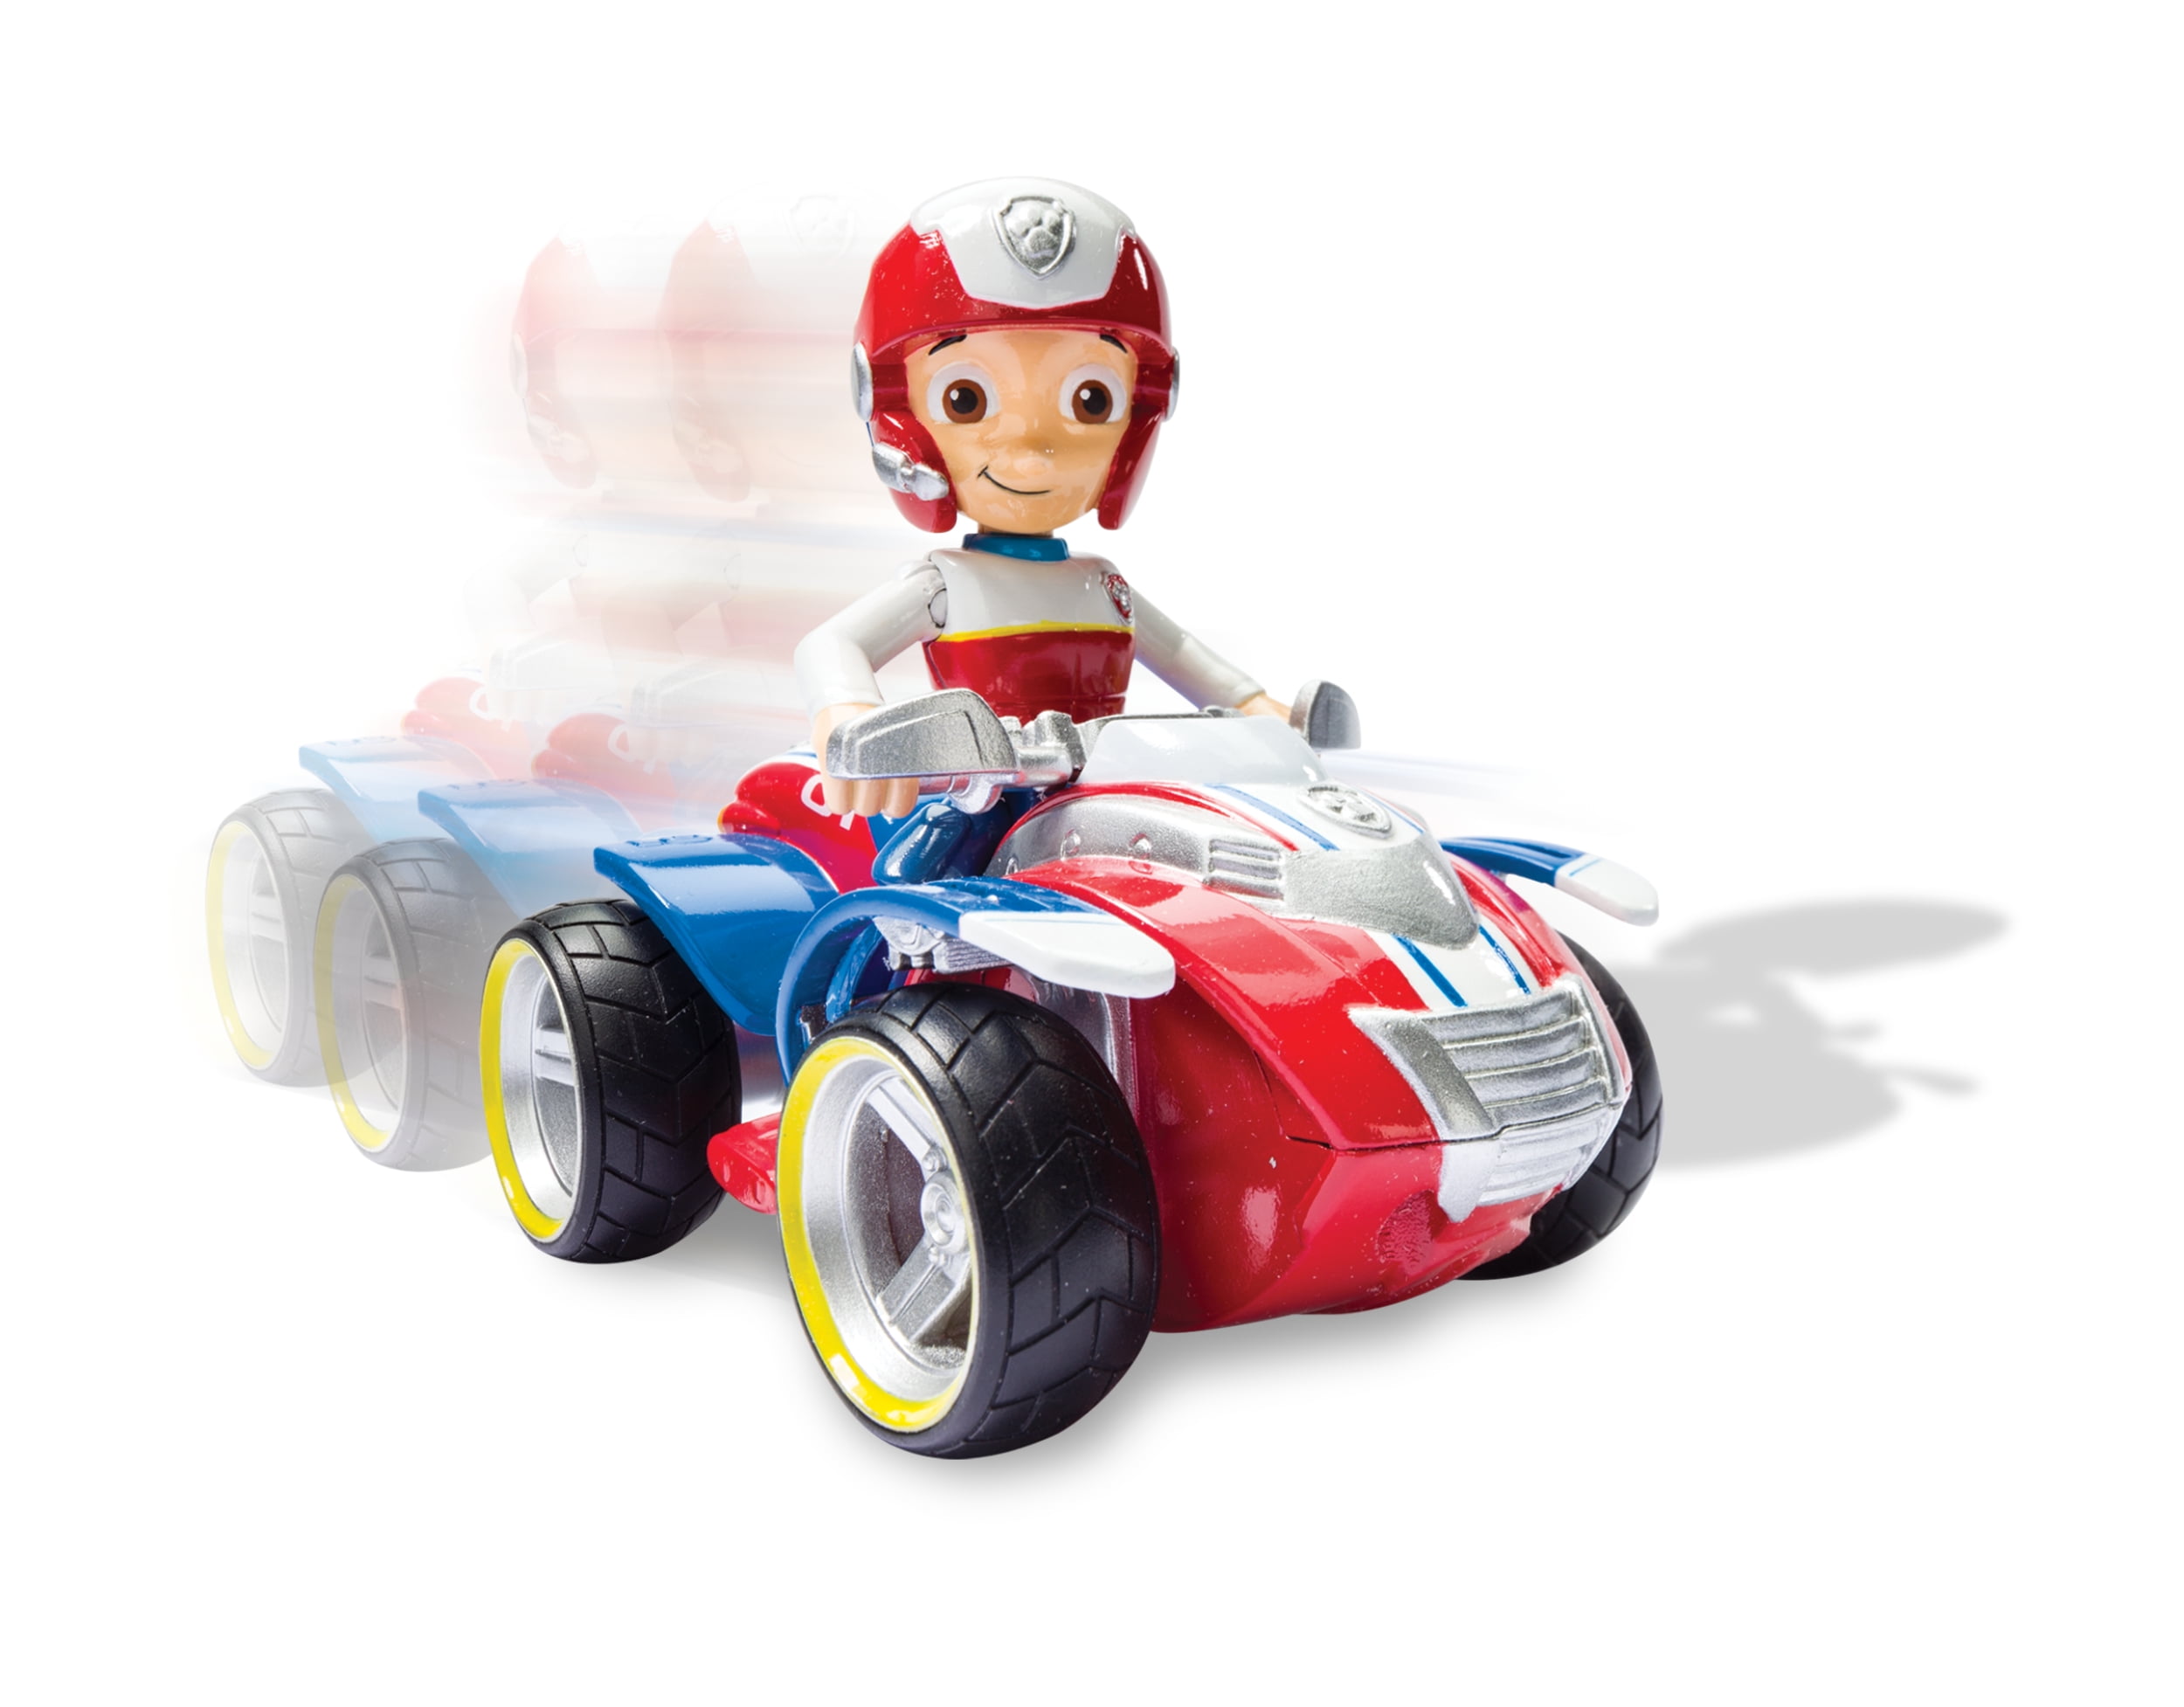 Nickelodeon Paw Patrol Ryder/'s Rescue ATV 6024006 for sale online